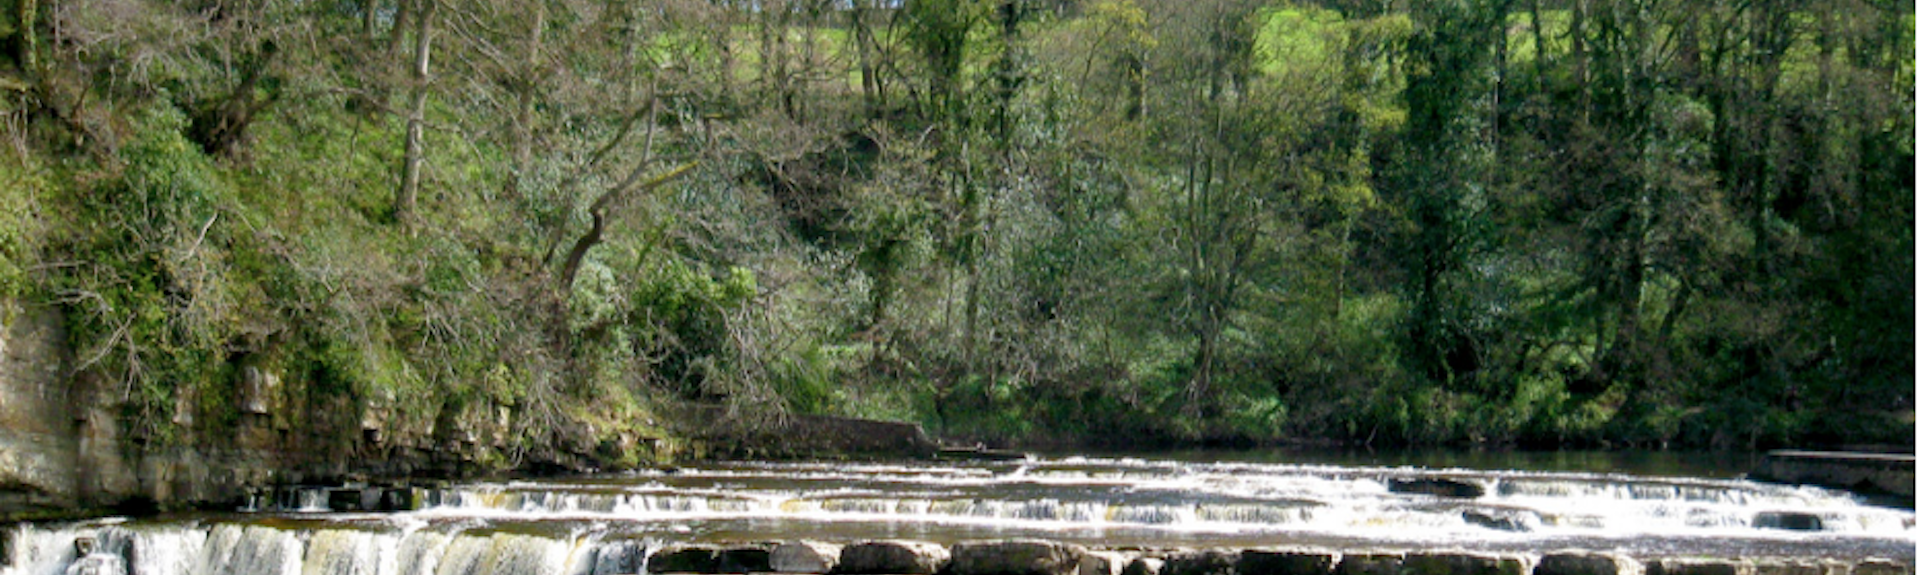 Water cascades down wide steps at Aysgarth Falls in North Yorkshire